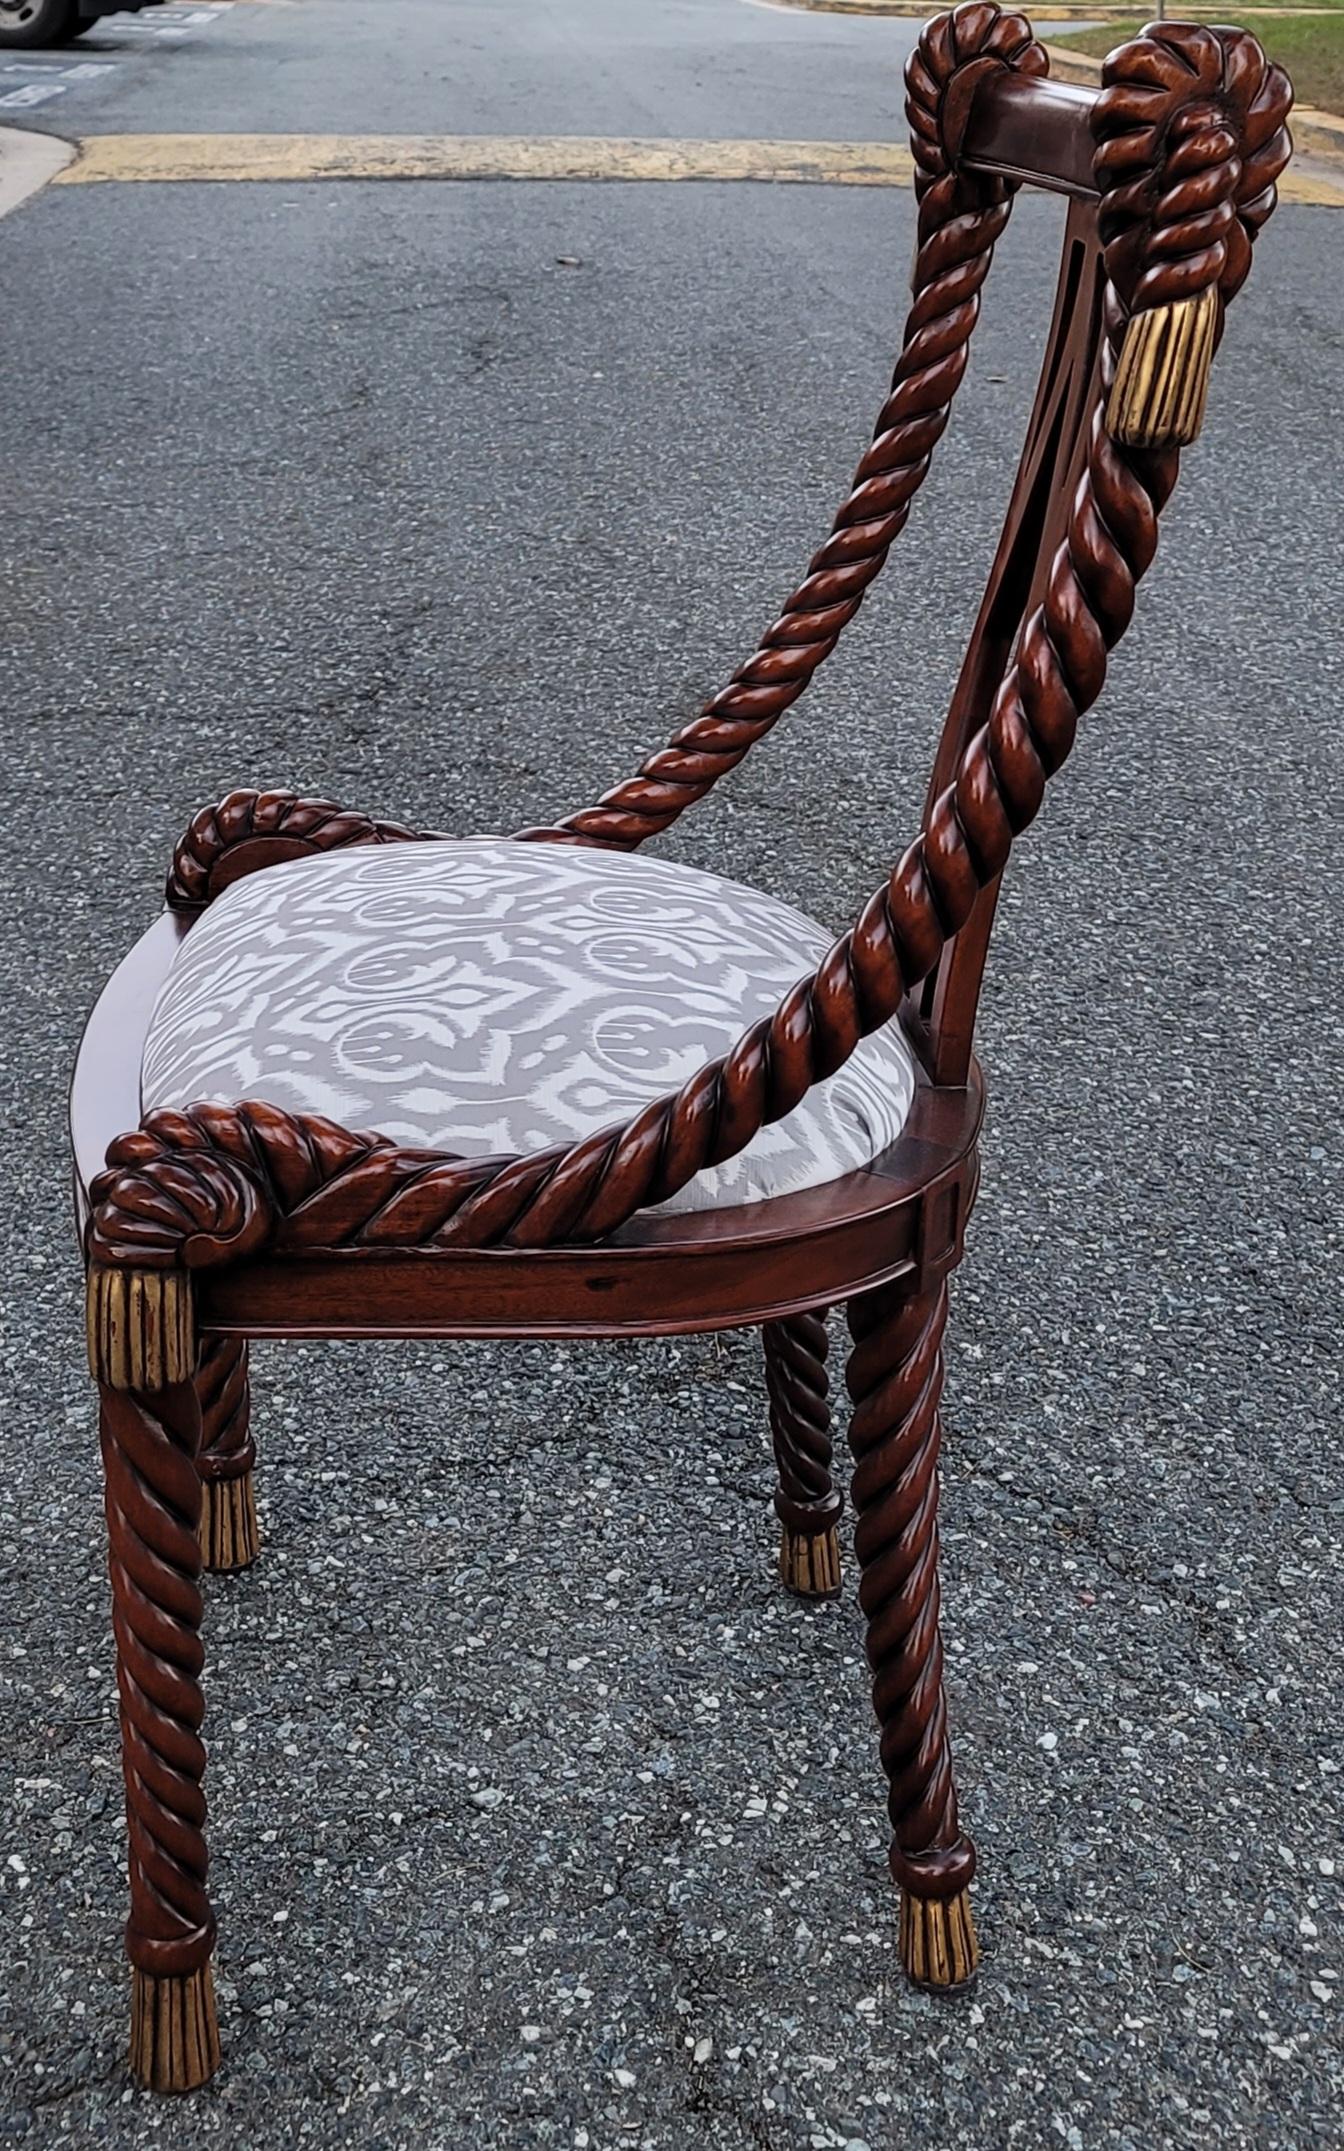 An exquisite pair of large Biedermeier Barley twist rope carved side chairs in excellent vintage condition.
From the Victoria Collection. Hand made in Australia. These are considered large chairs. They measures 23